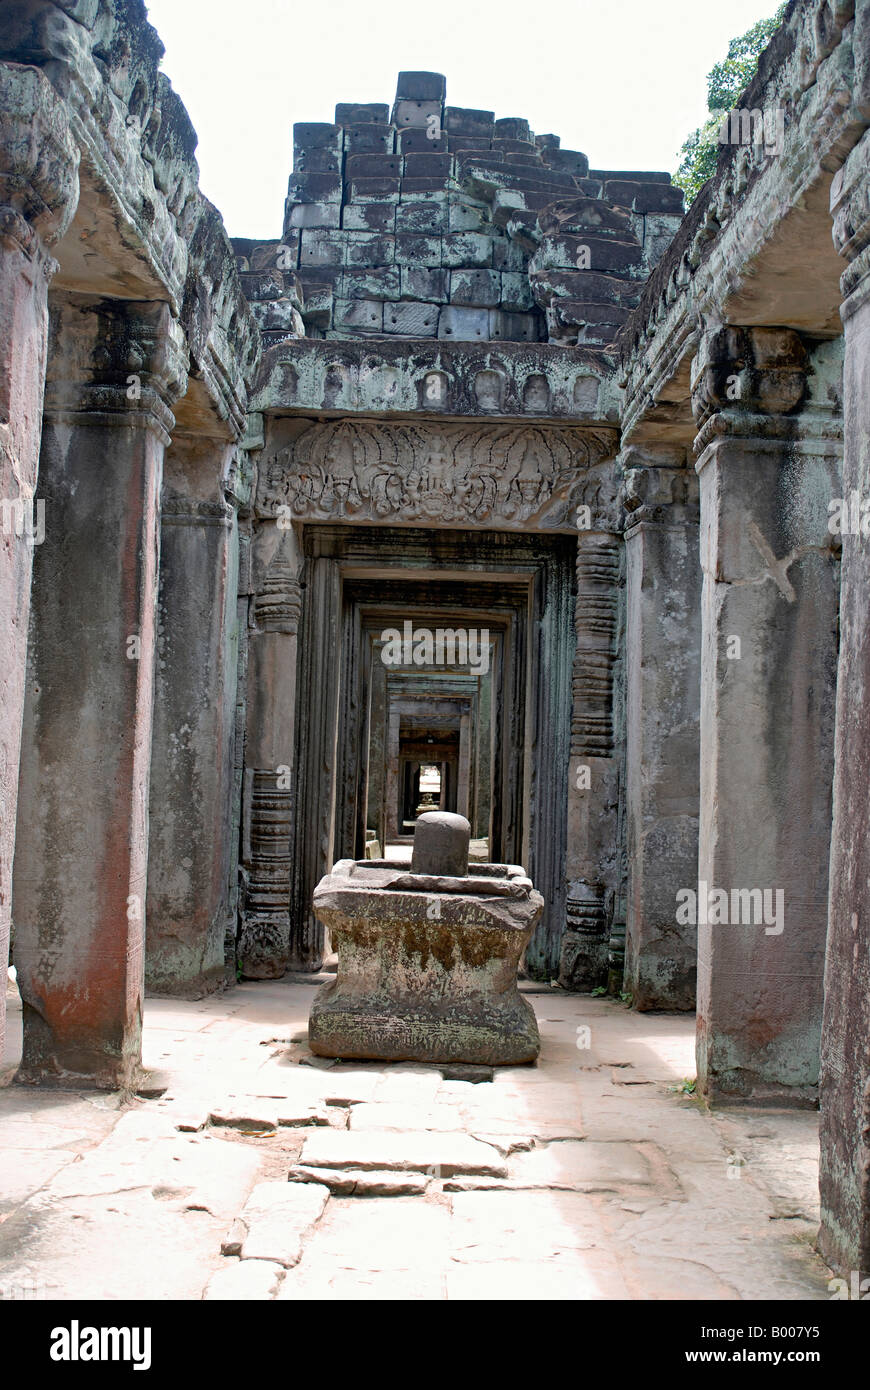 Cambodia, Preah Khan 1191 A.D. Shiva linga in the inner gallery. Stock Photo